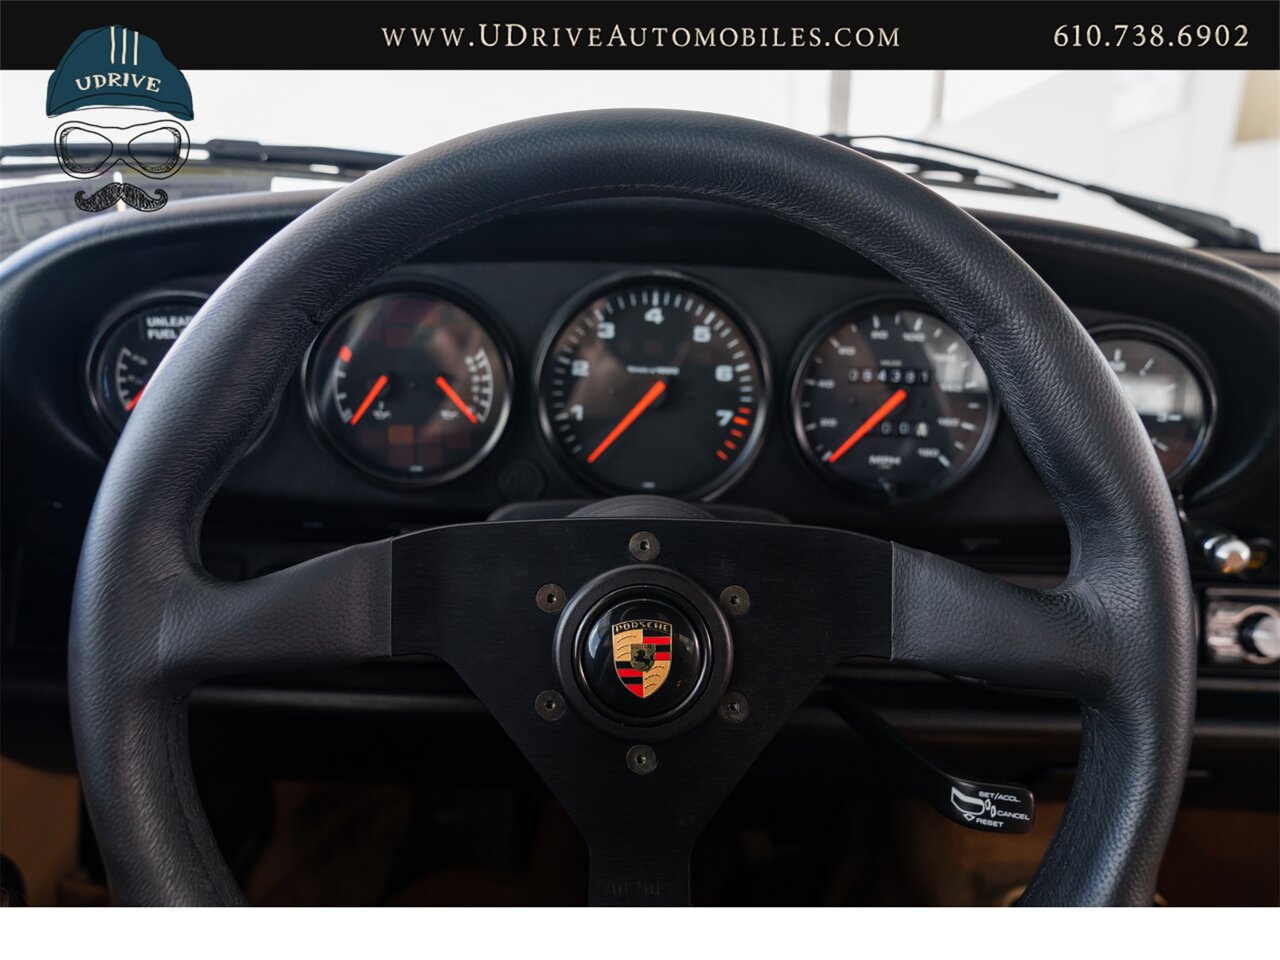 1991 Porsche 911 Carrera 2  5 Speed $57k in Service and UpGrades Since 2020 - Photo 39 - West Chester, PA 19382